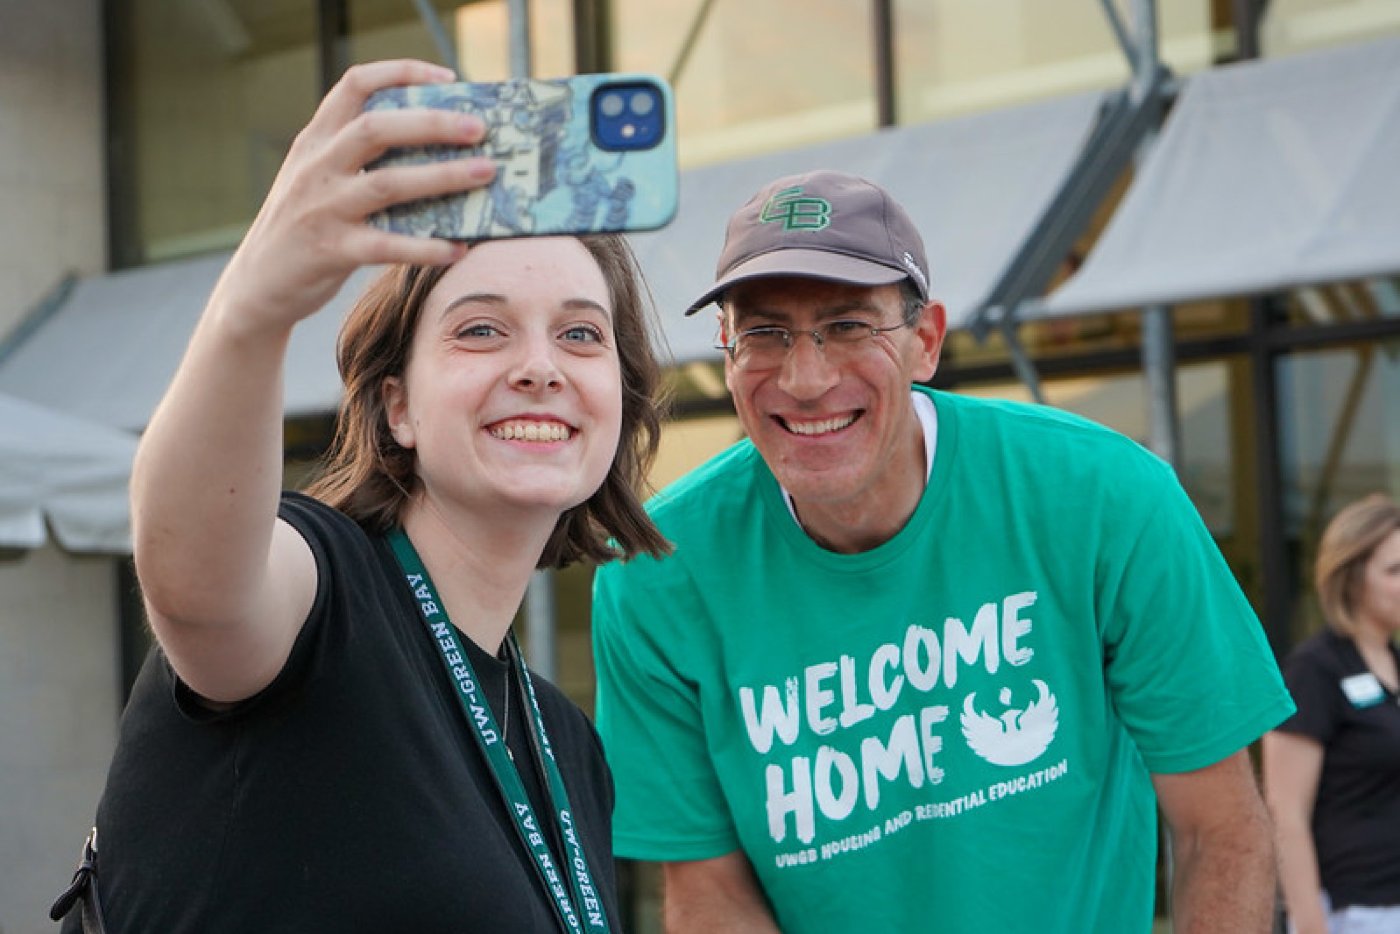 A student takes a selfie with Chancellor Alexander during. GB Welcome event